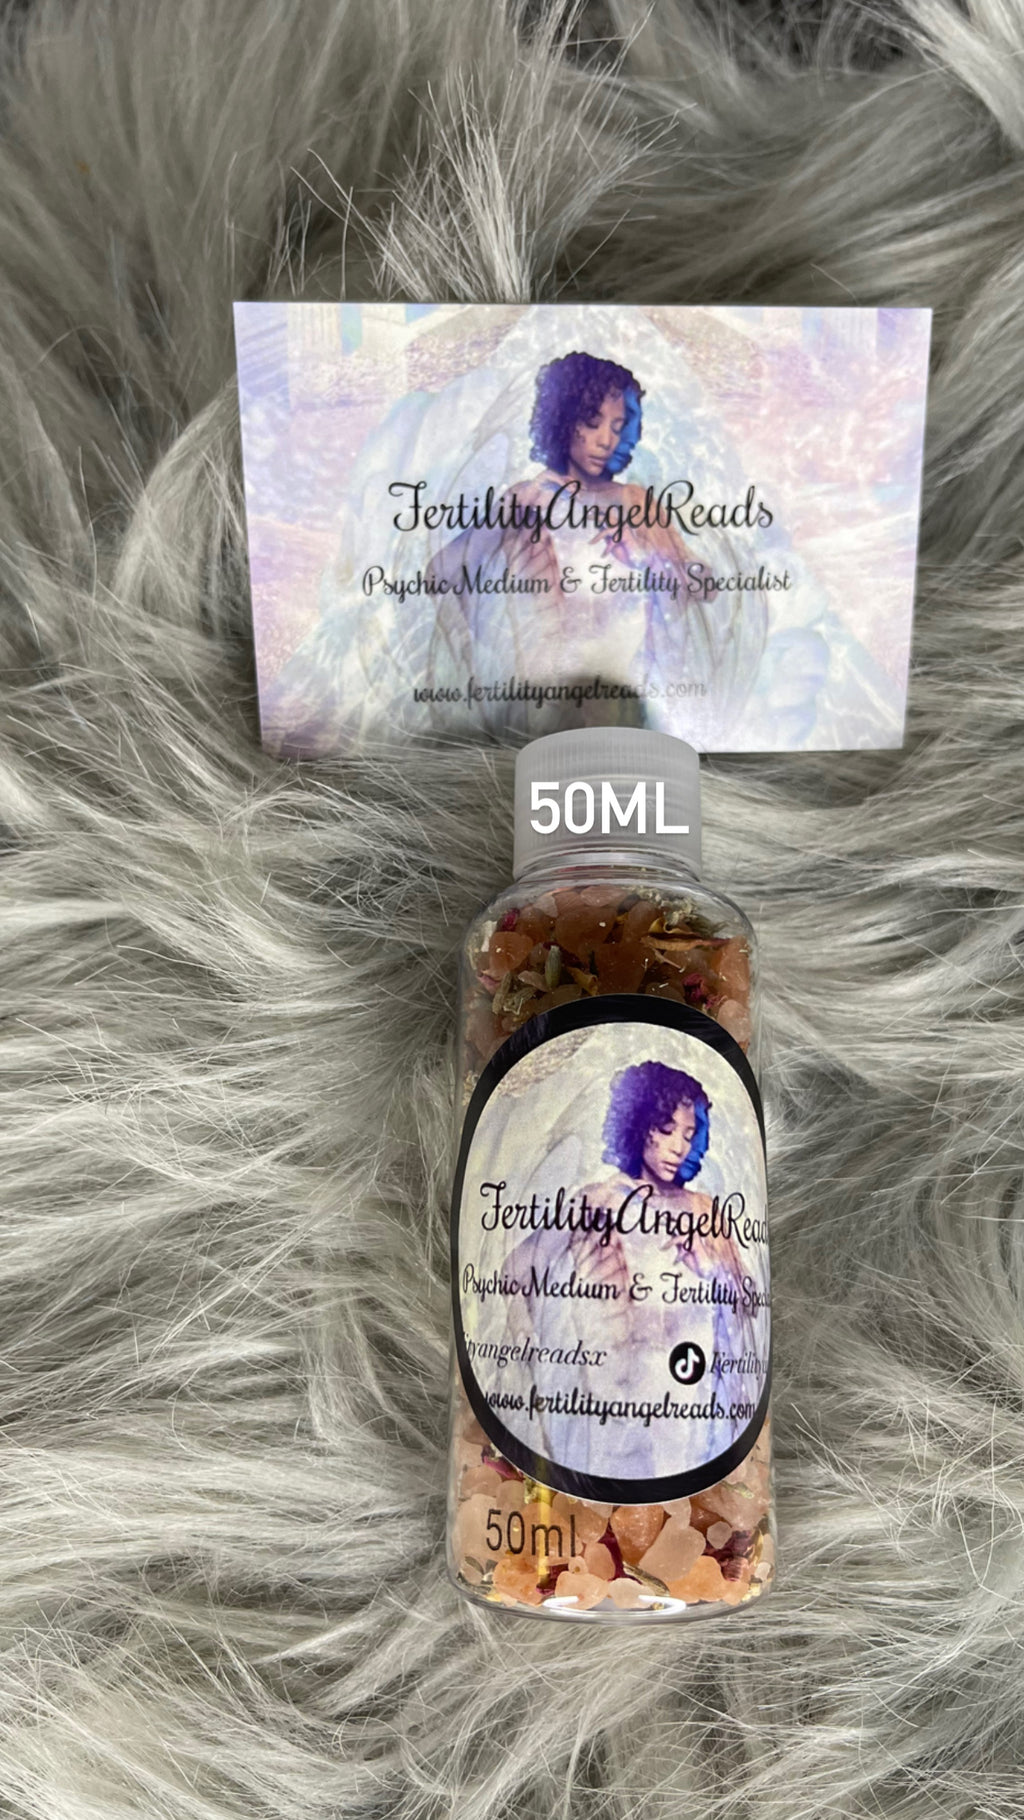 Magical Blend of Herbs and Crystals With aroma Therapy oils to Assist Fertility